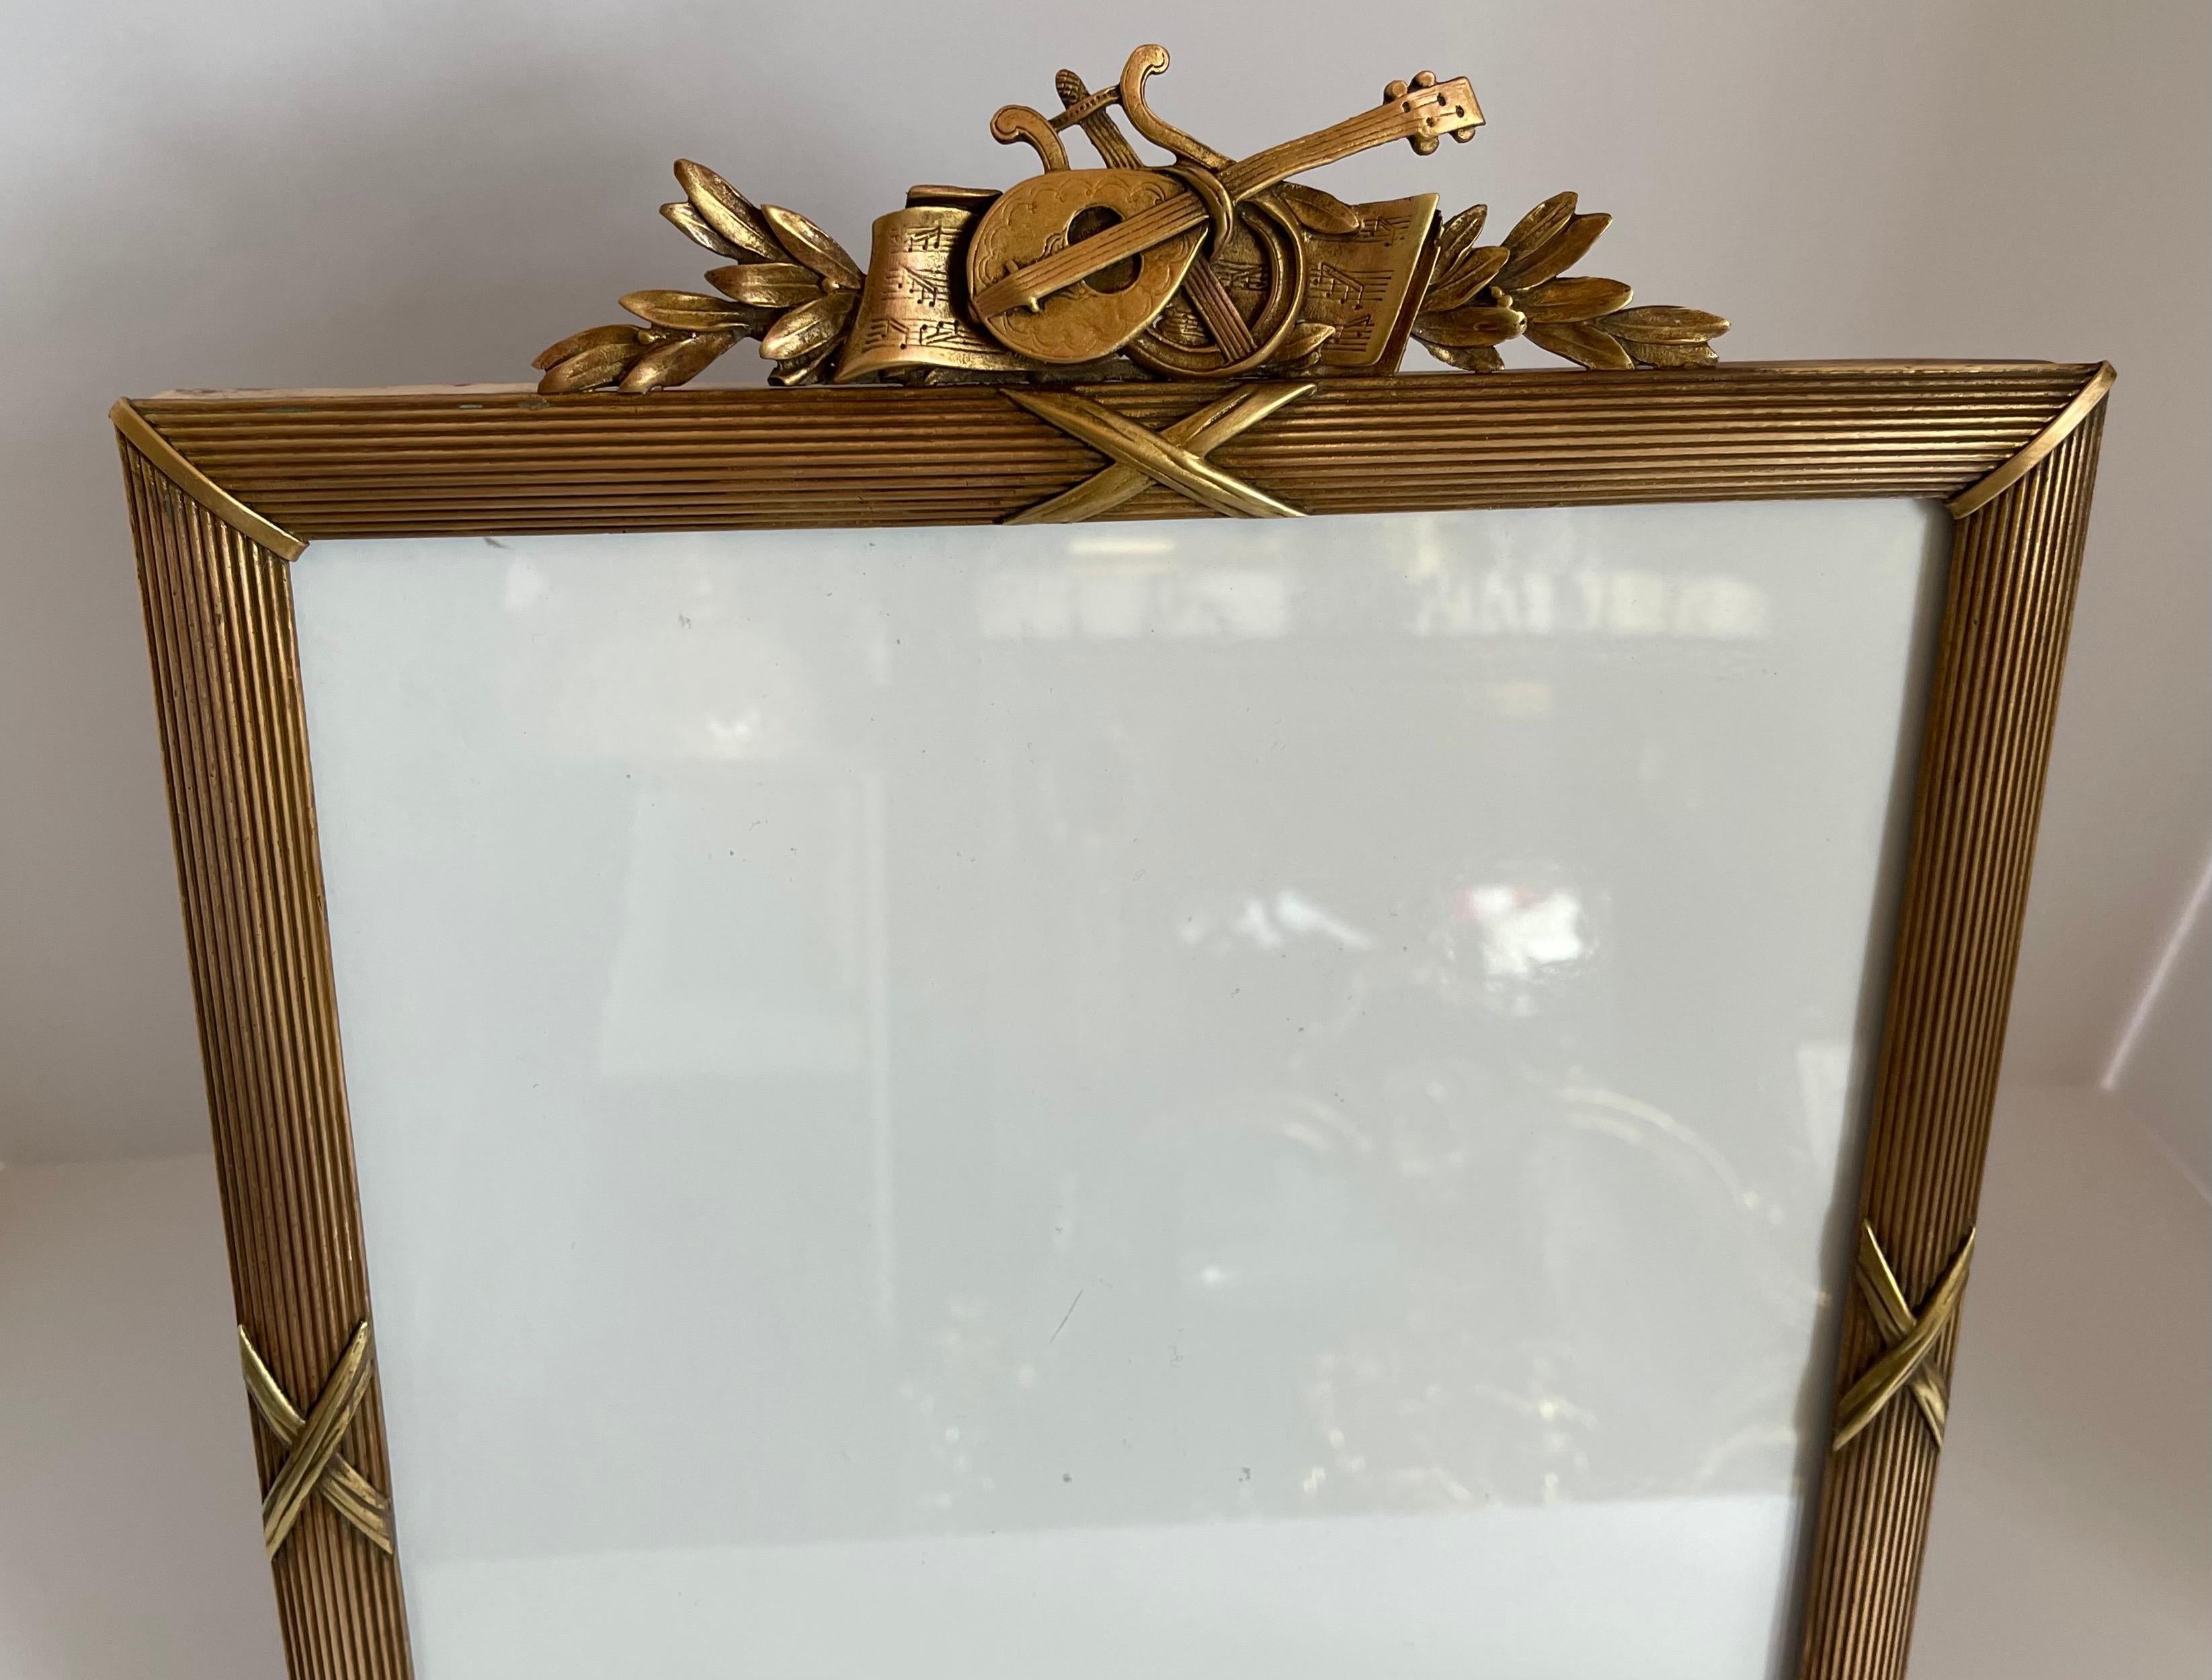 A wonderful large French Louis XVI style gilt bronze picture frame with lute / instruments and garland crown bordered with reed and ribbon frame
Stamped France.